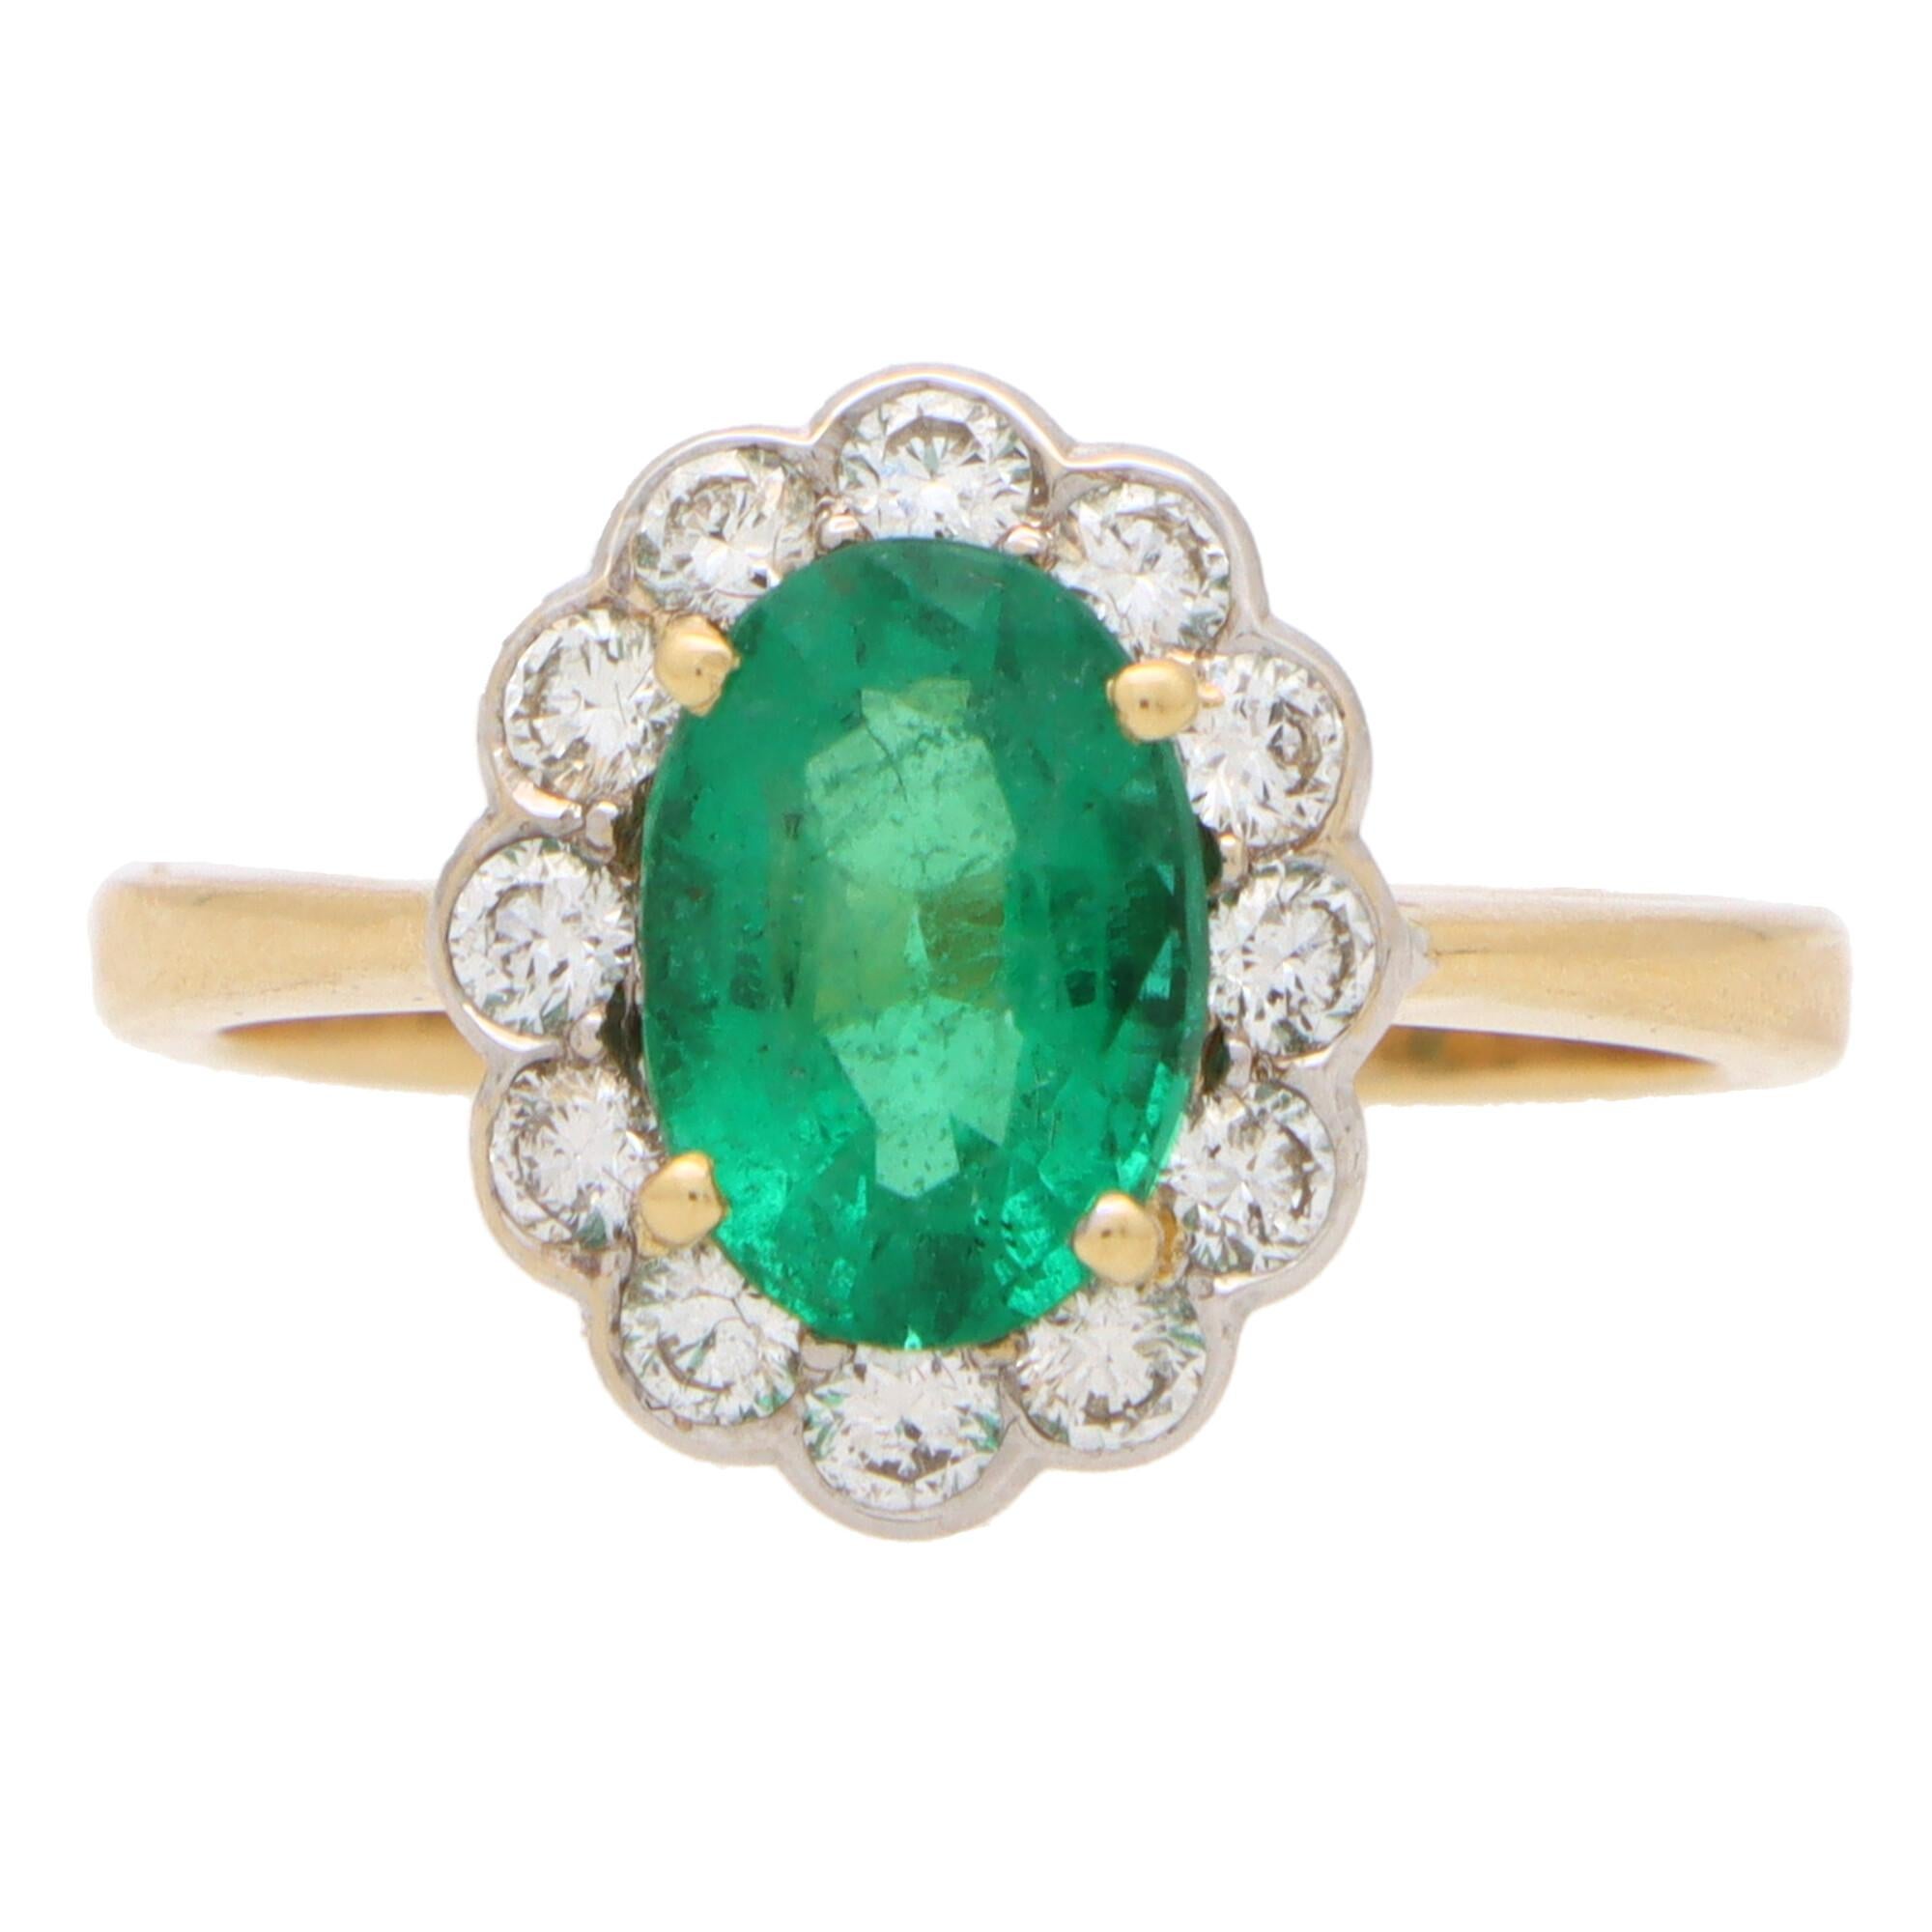 A beautiful emerald and diamond cluster ring set in 18k yellow and white gold.

The piece is centrally set with a vibrant oval cut emerald which is claw set in yellow gold. The emerald has a fantastic vibrant green colour to it and is surrounded by